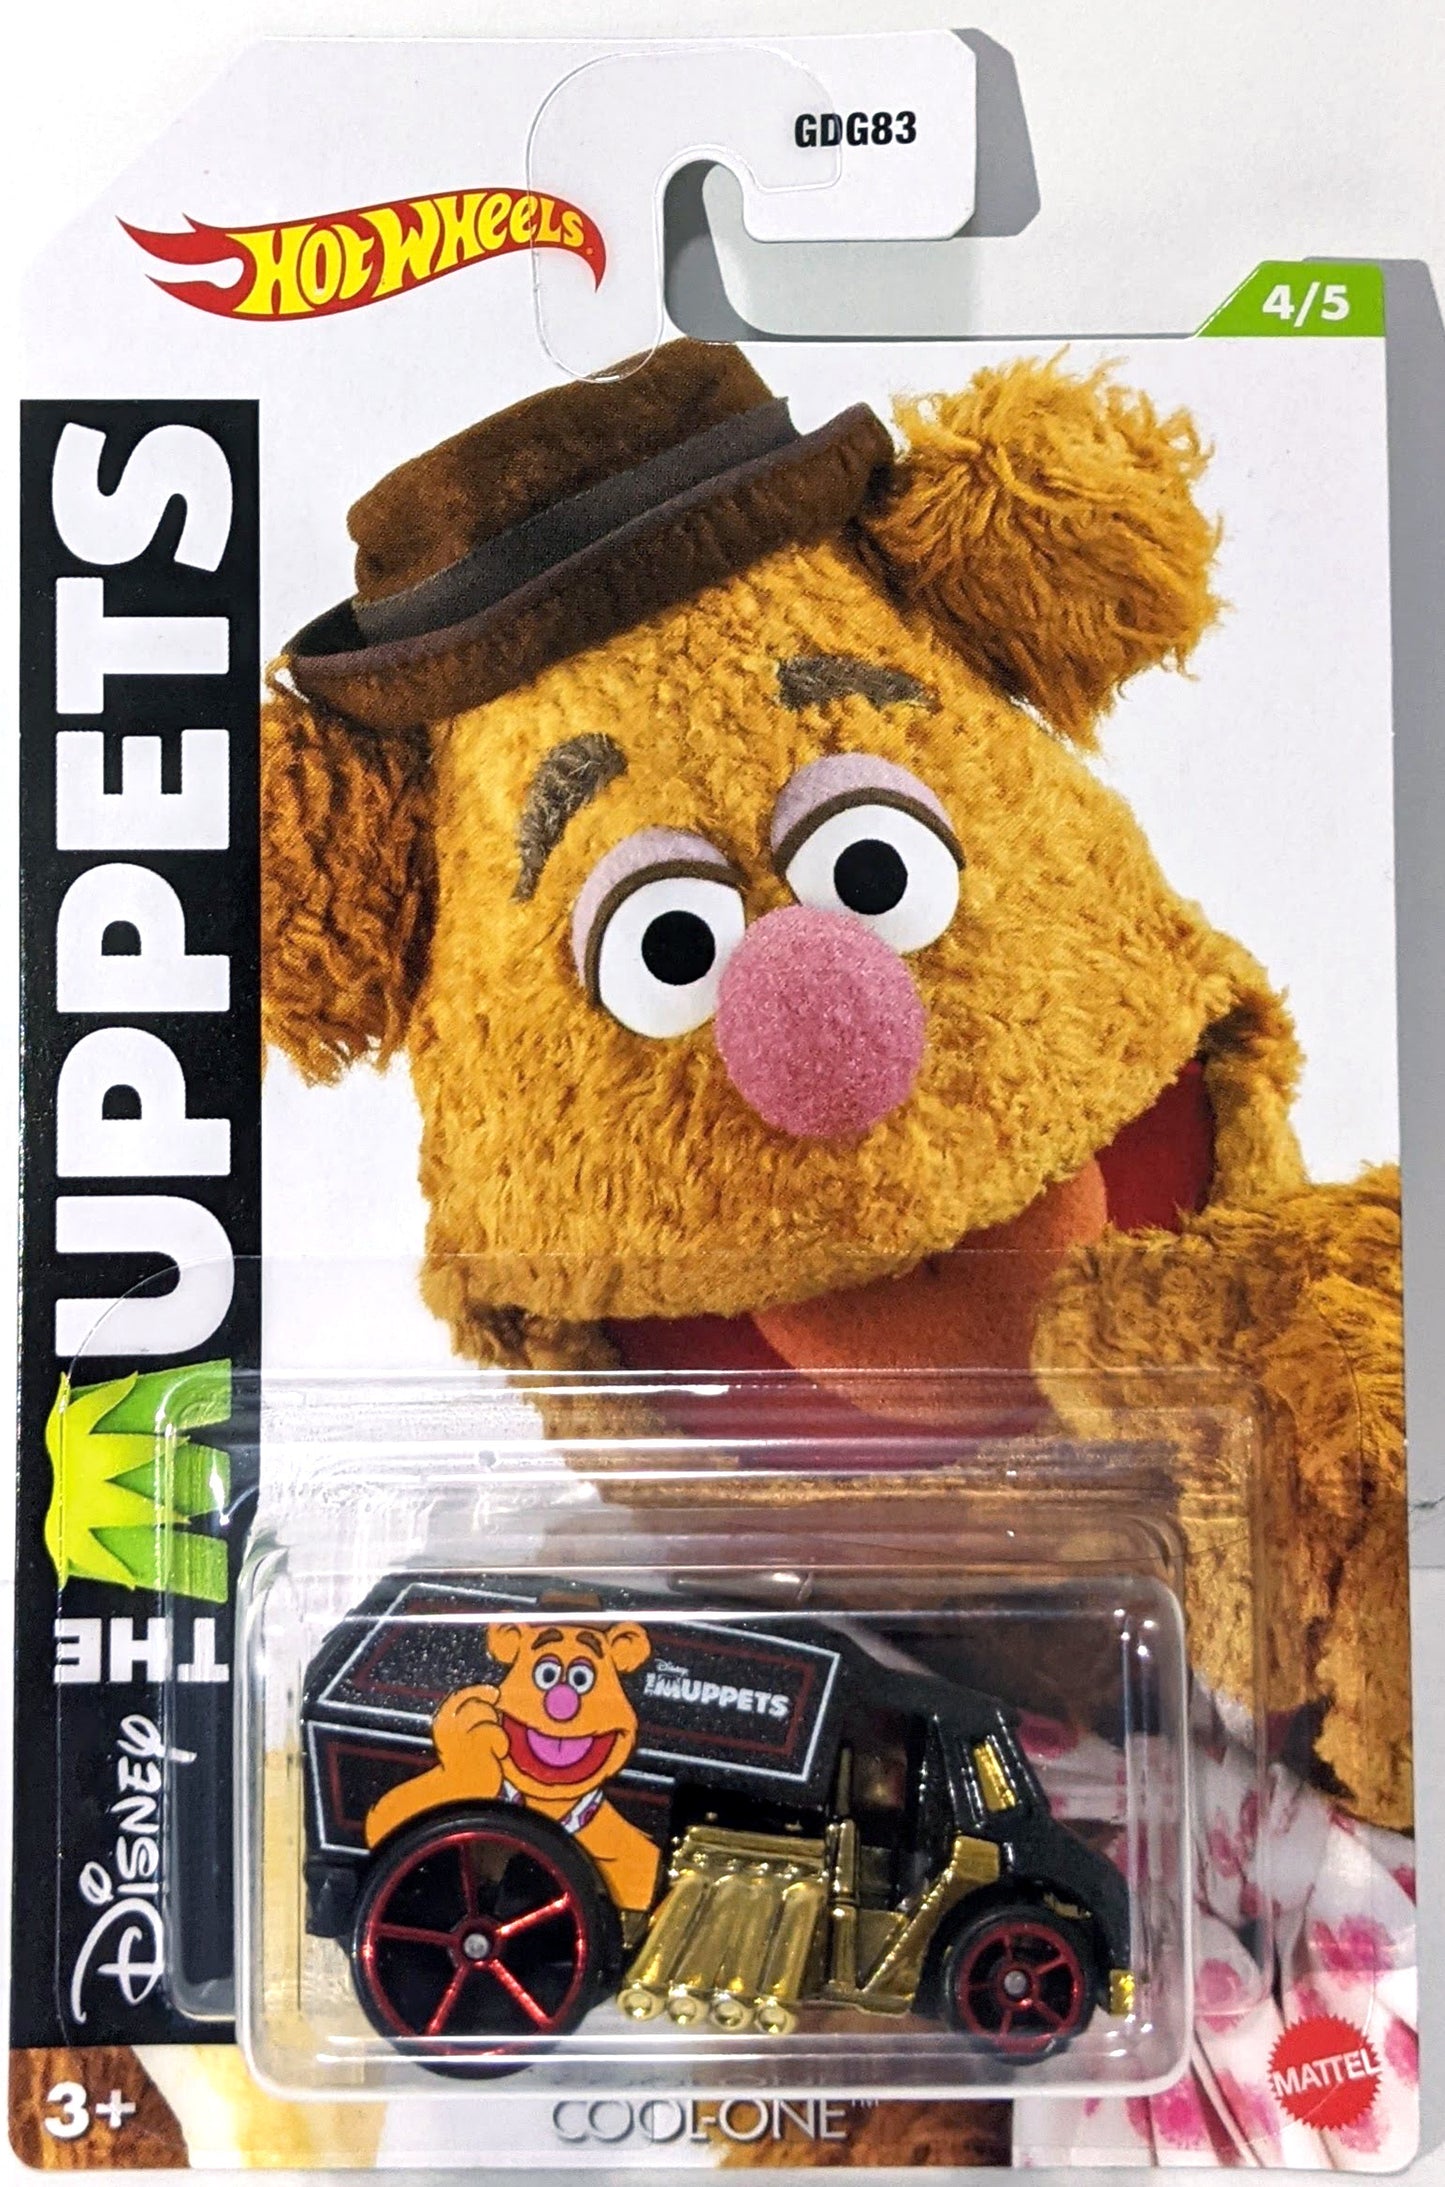 Hot Wheels 2021 - Disney The Muppets # 4/5 - Cool-One - Black - Red OH5SP Wheels - Gold Chrome Windows - Gold Chrome Interior